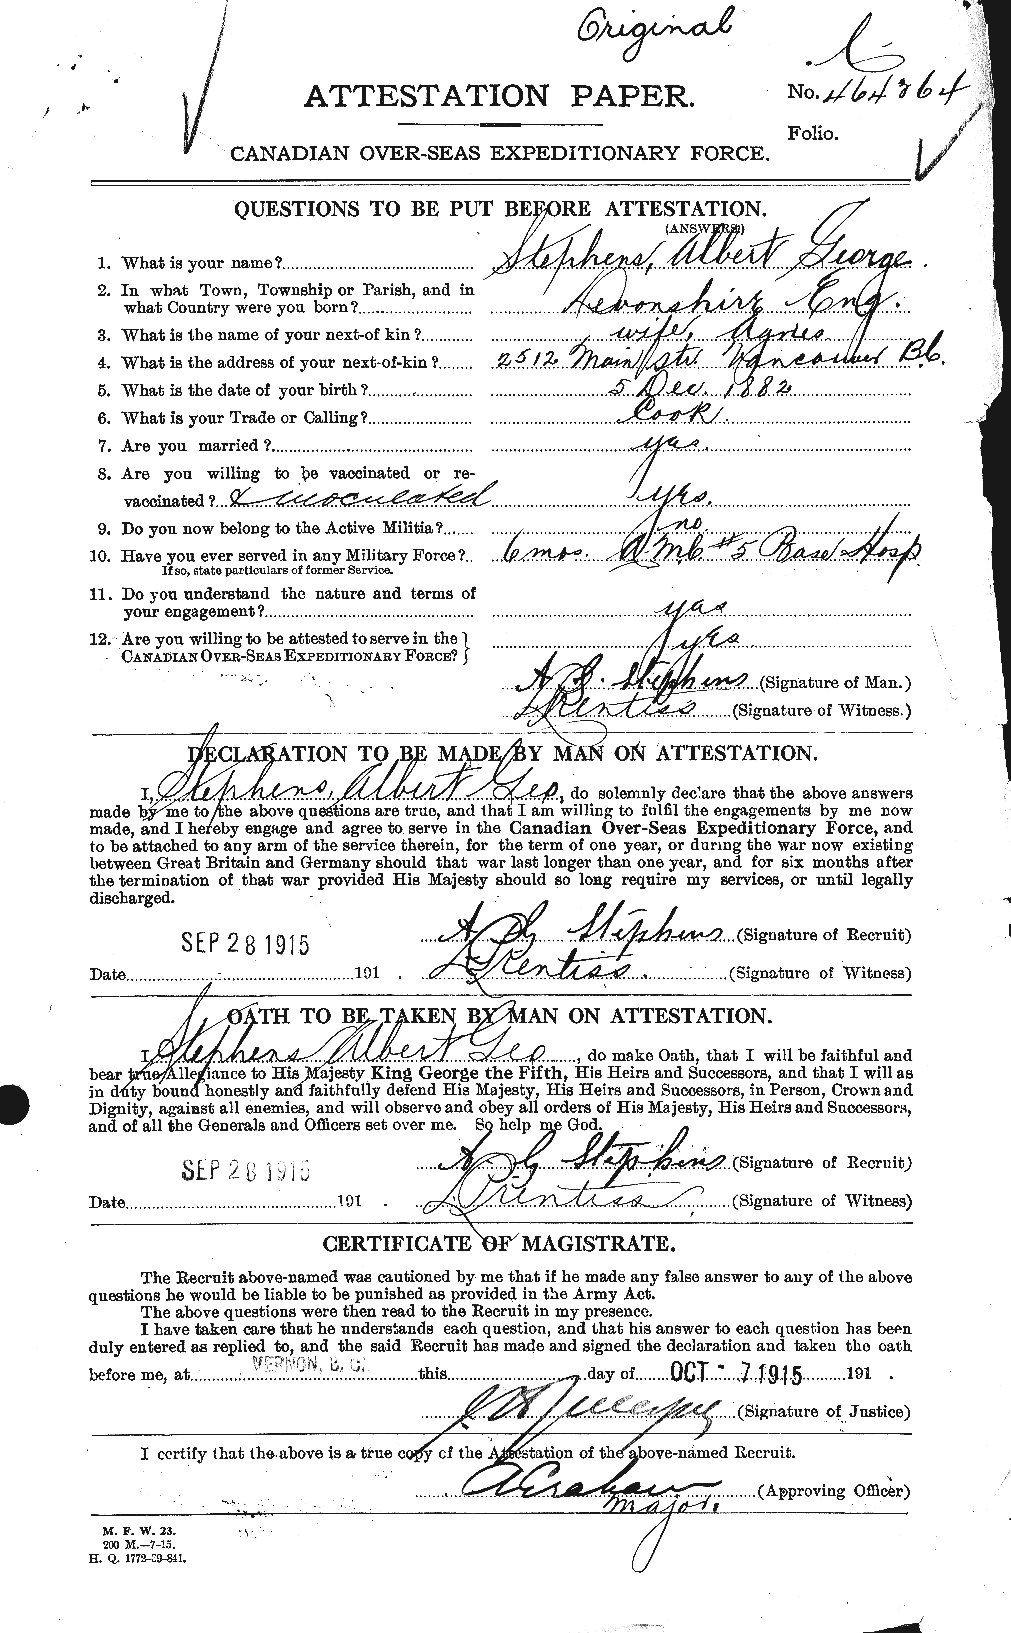 Personnel Records of the First World War - CEF 116961a